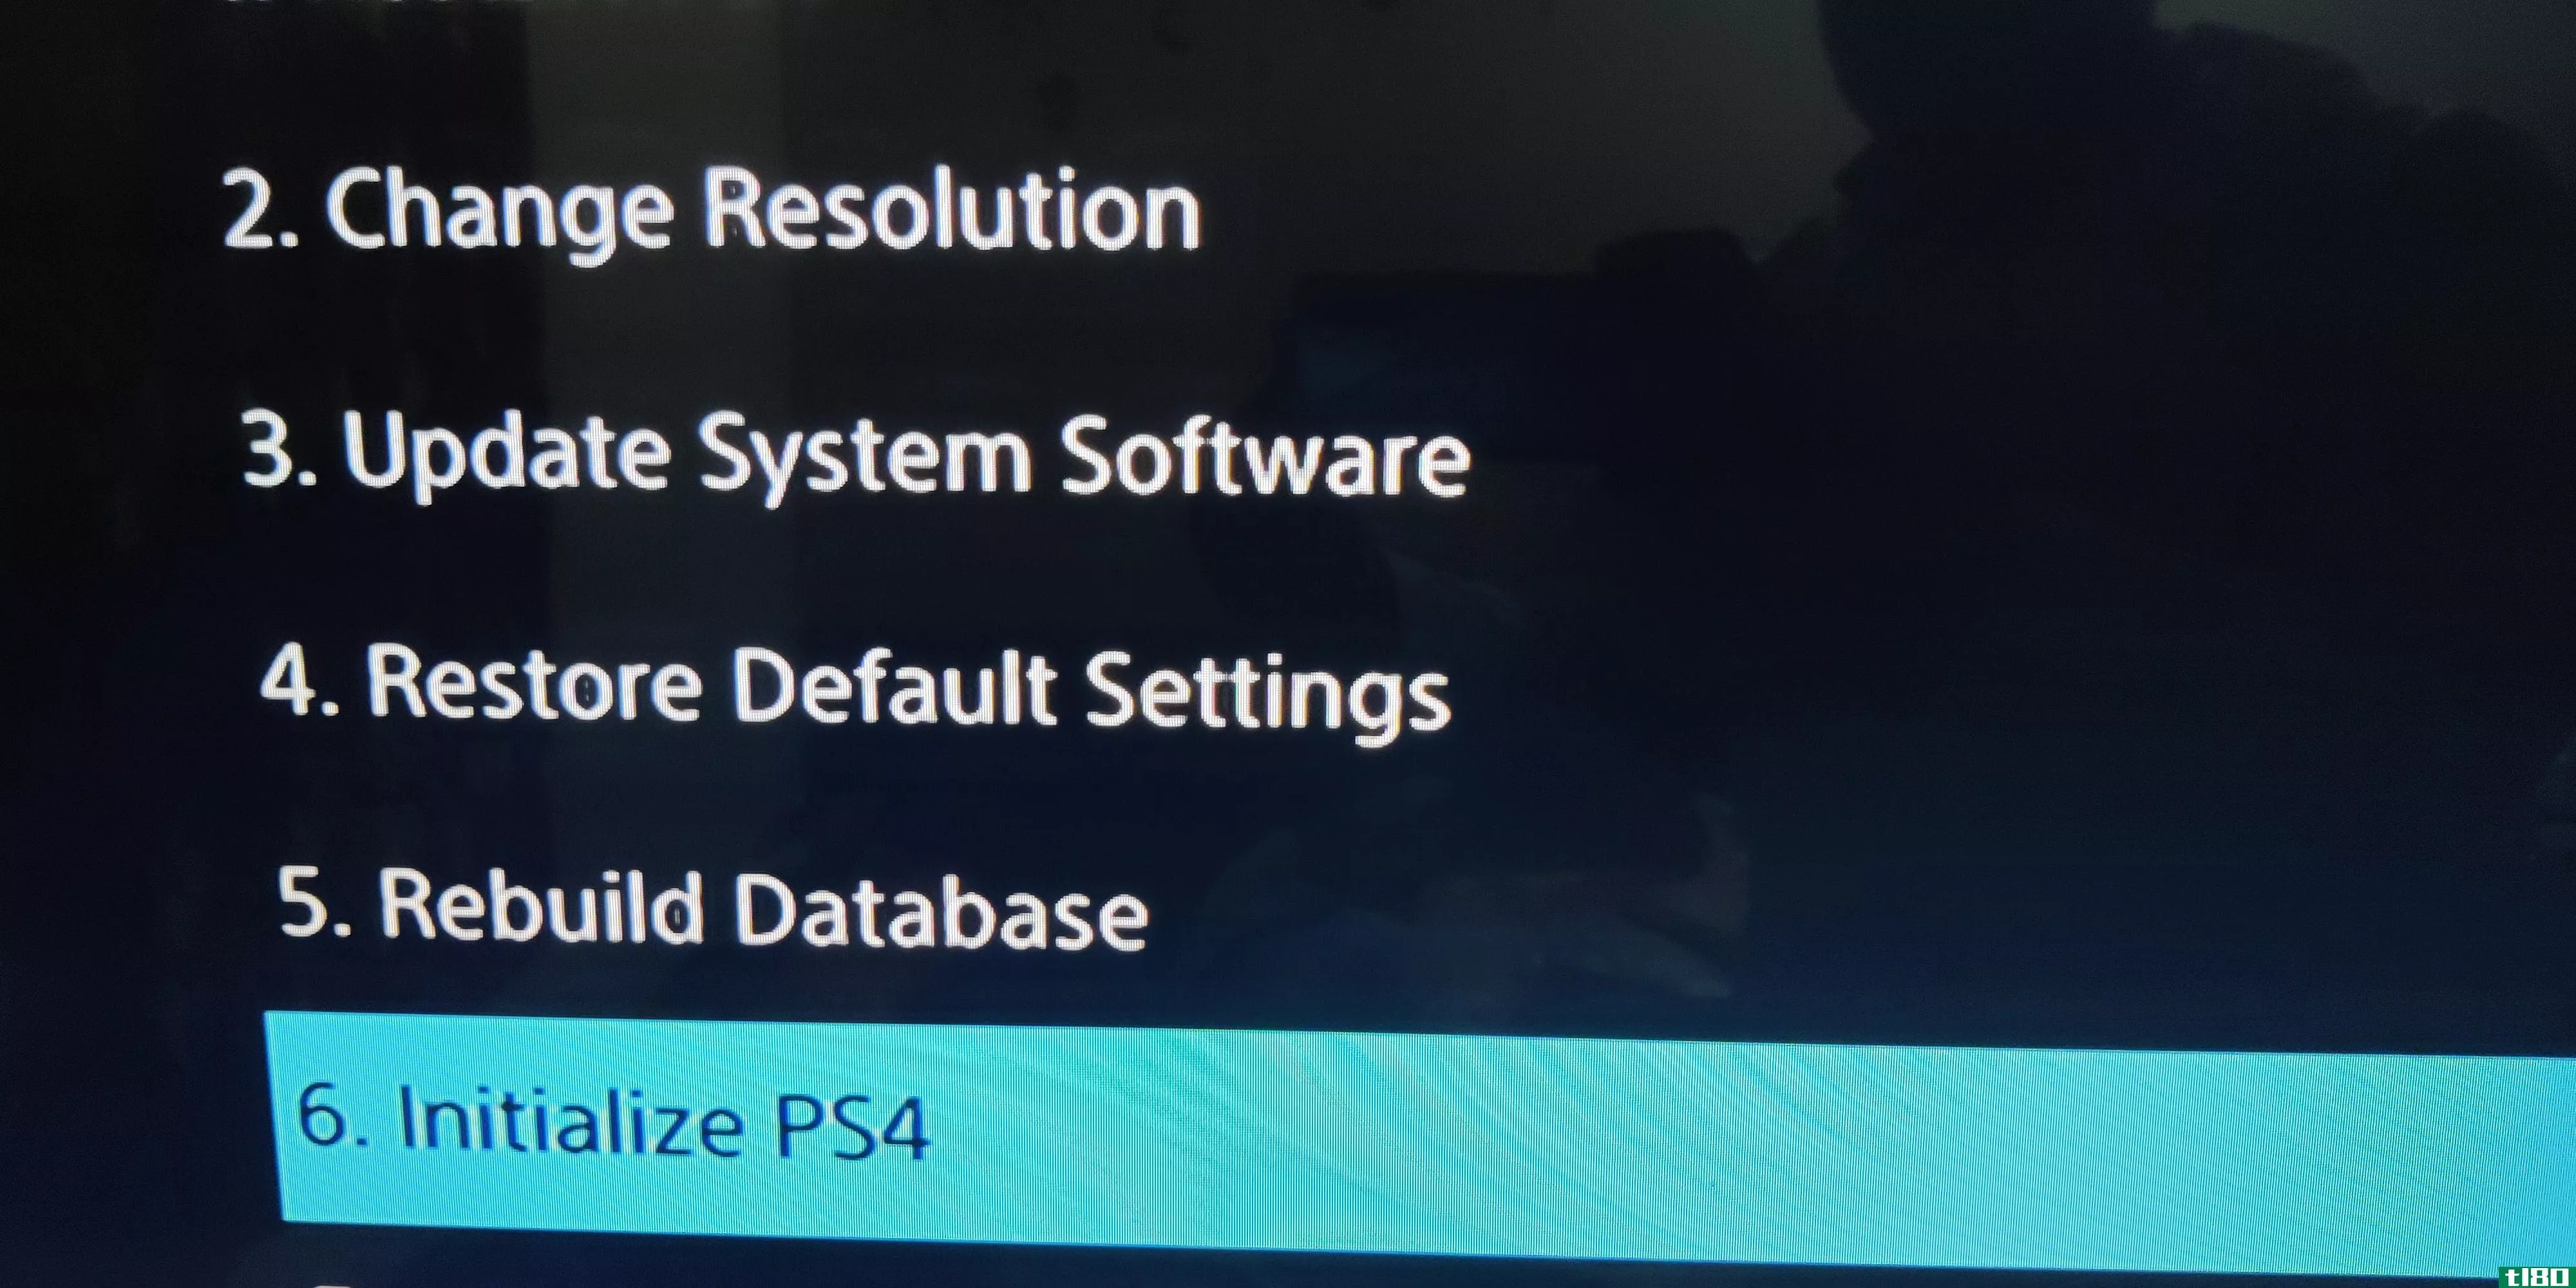 Factory reset the PS4 from safe mode